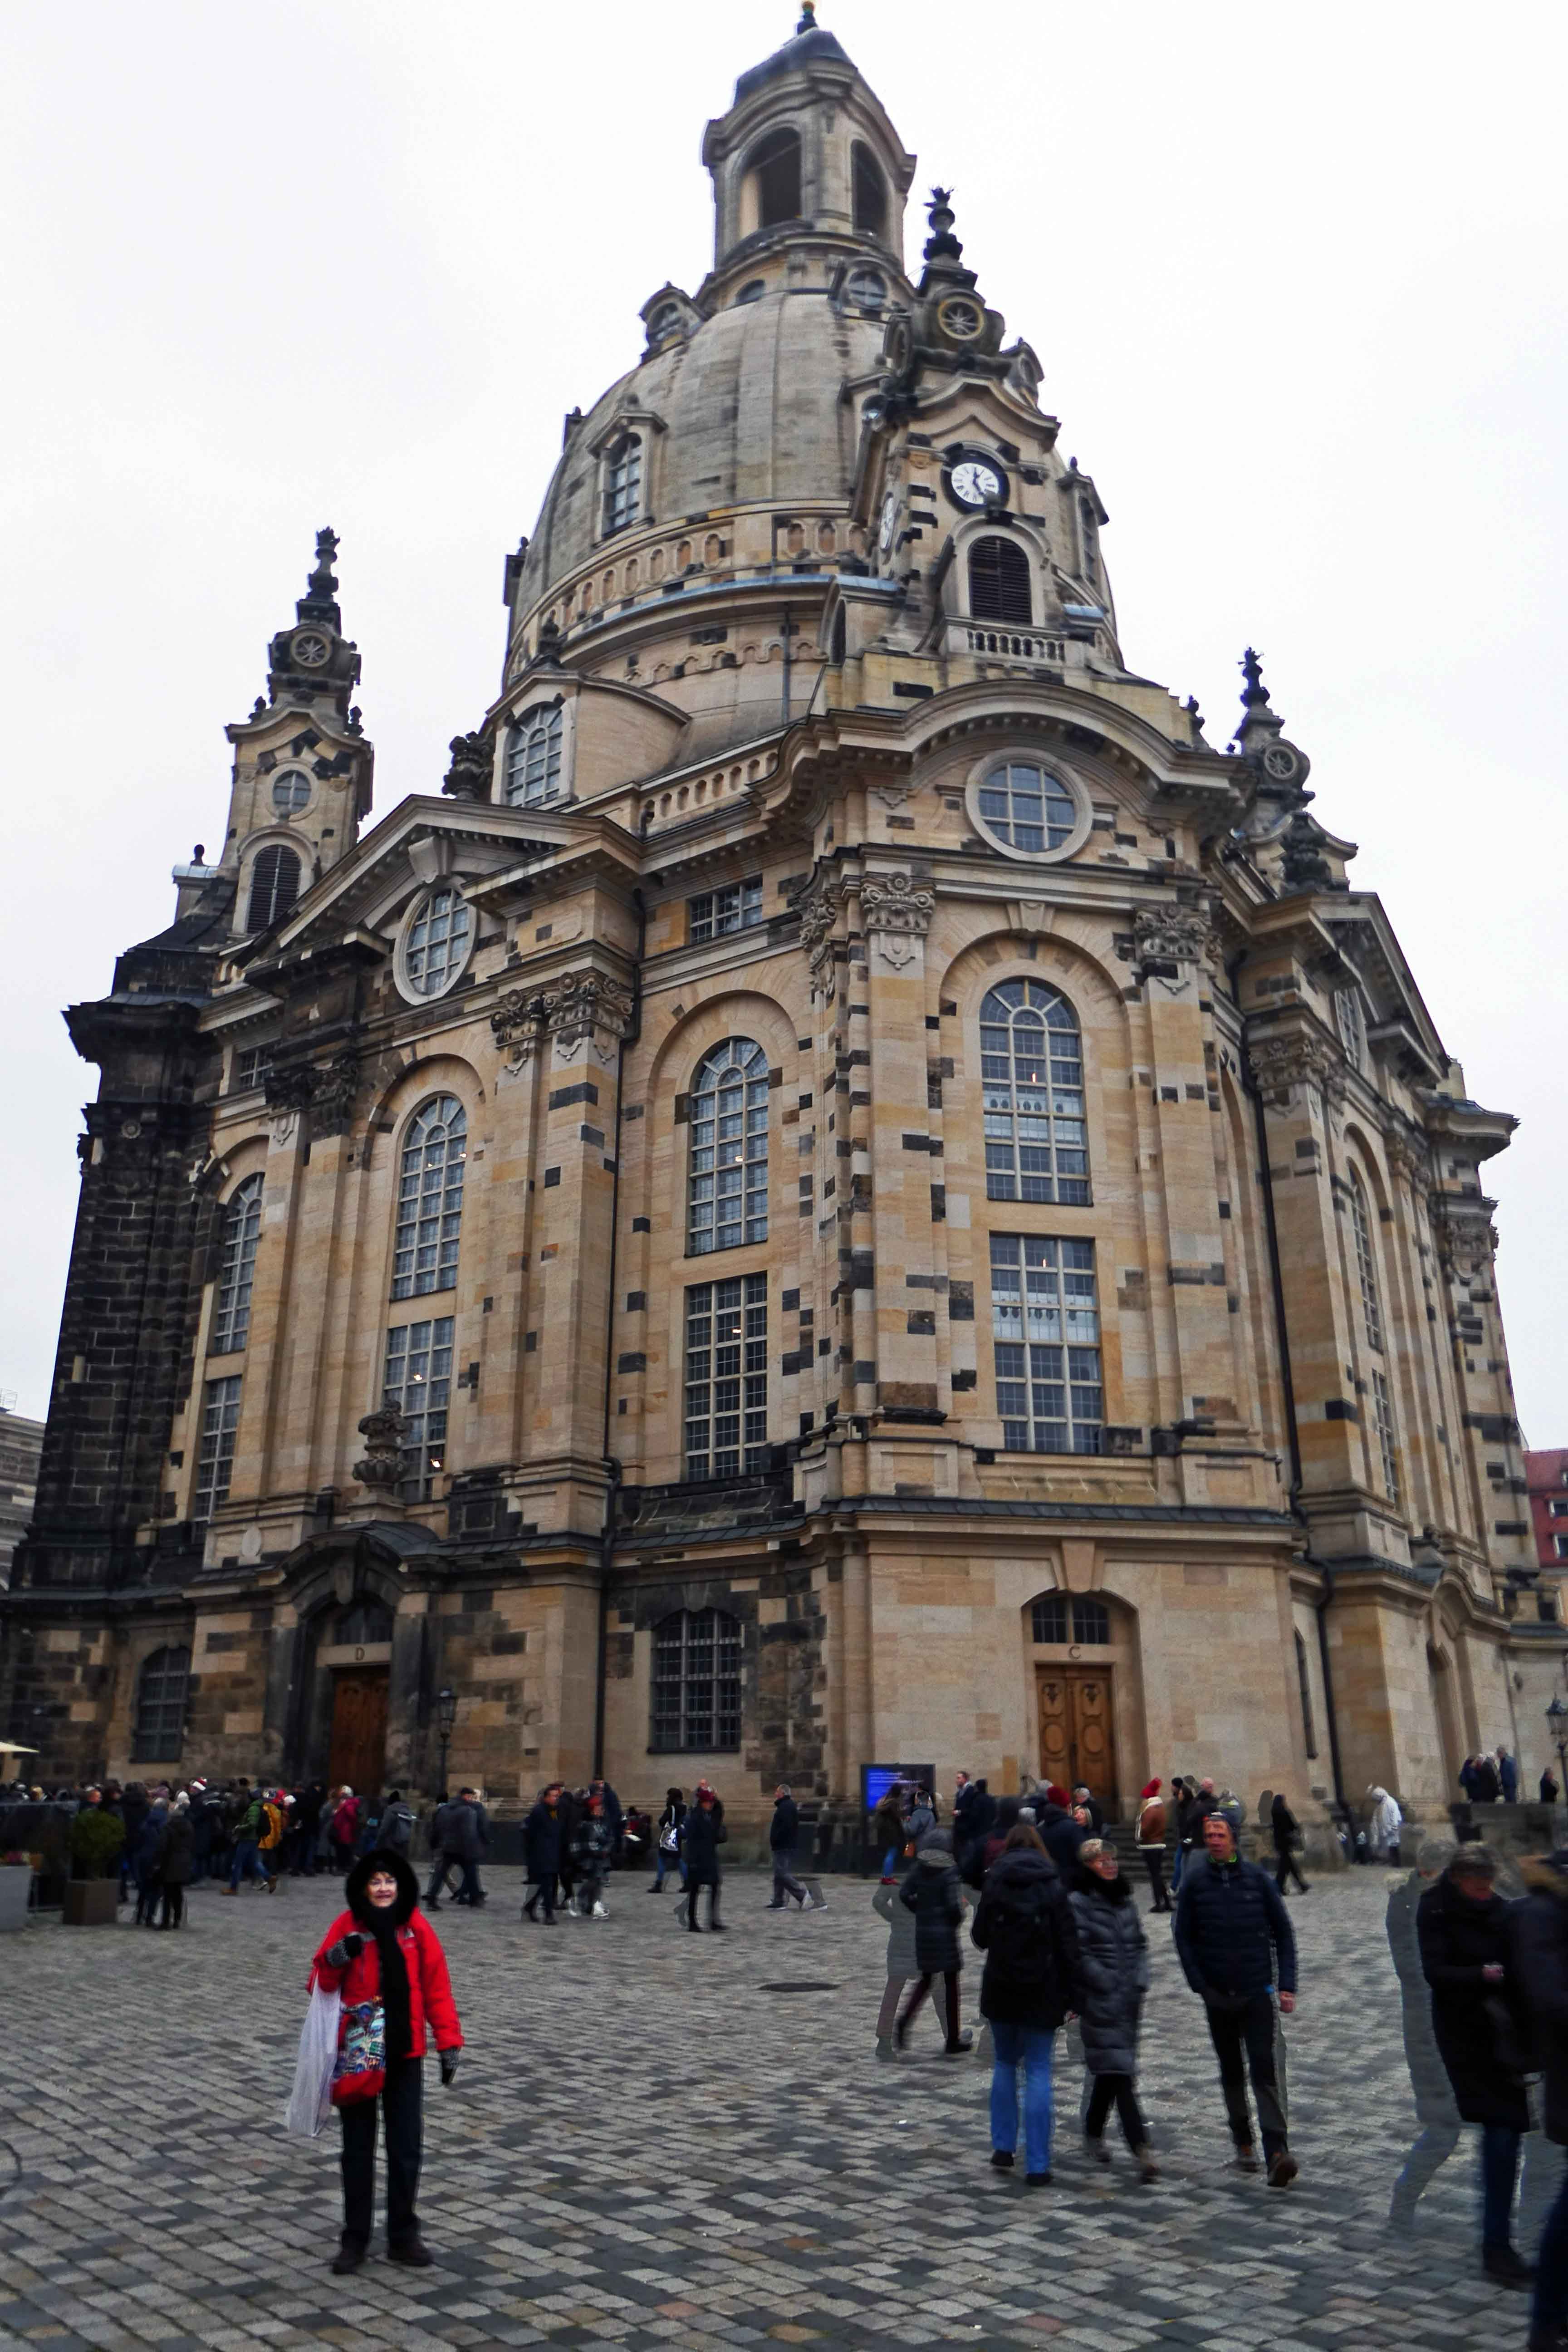 Dresdens Frauenkirche was built in 1743; destroyed in WWII; and rebuilt 1994-2005 using many original stones from the rubble